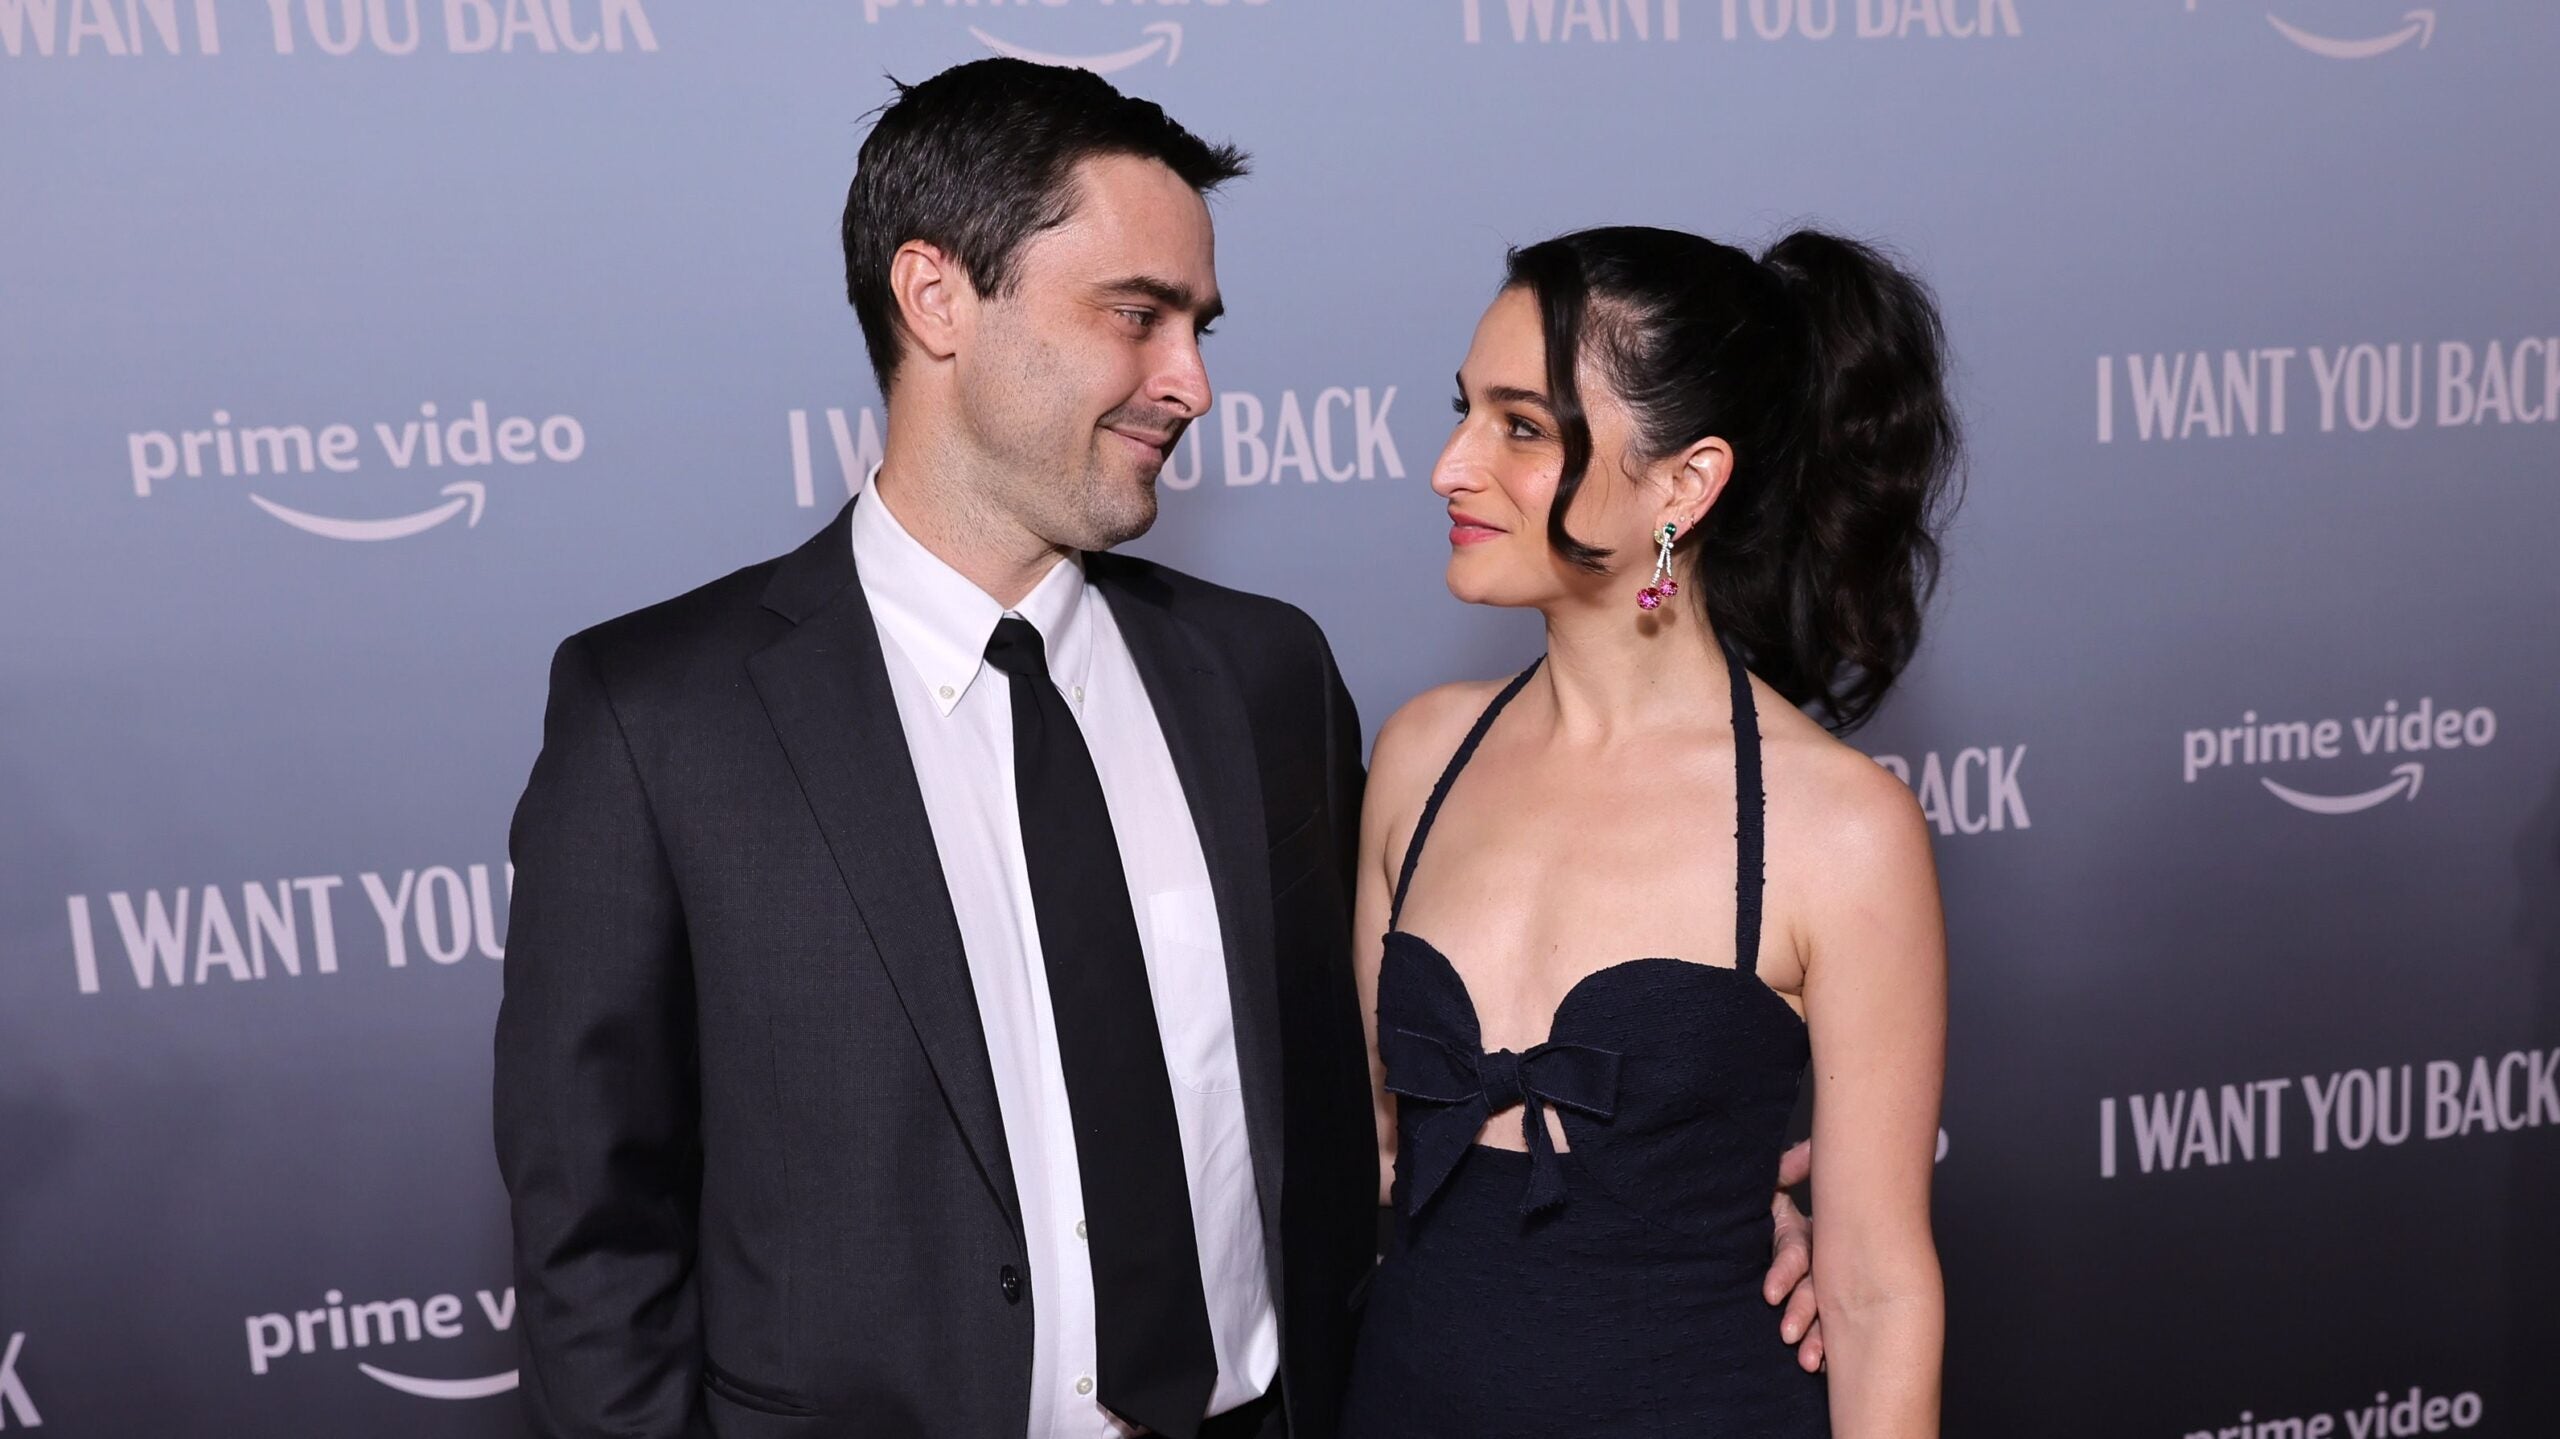 Ben Shattuck and Jenny Slate attend the Los Angeles premiere of Amazon Prime's "I Want You Back."